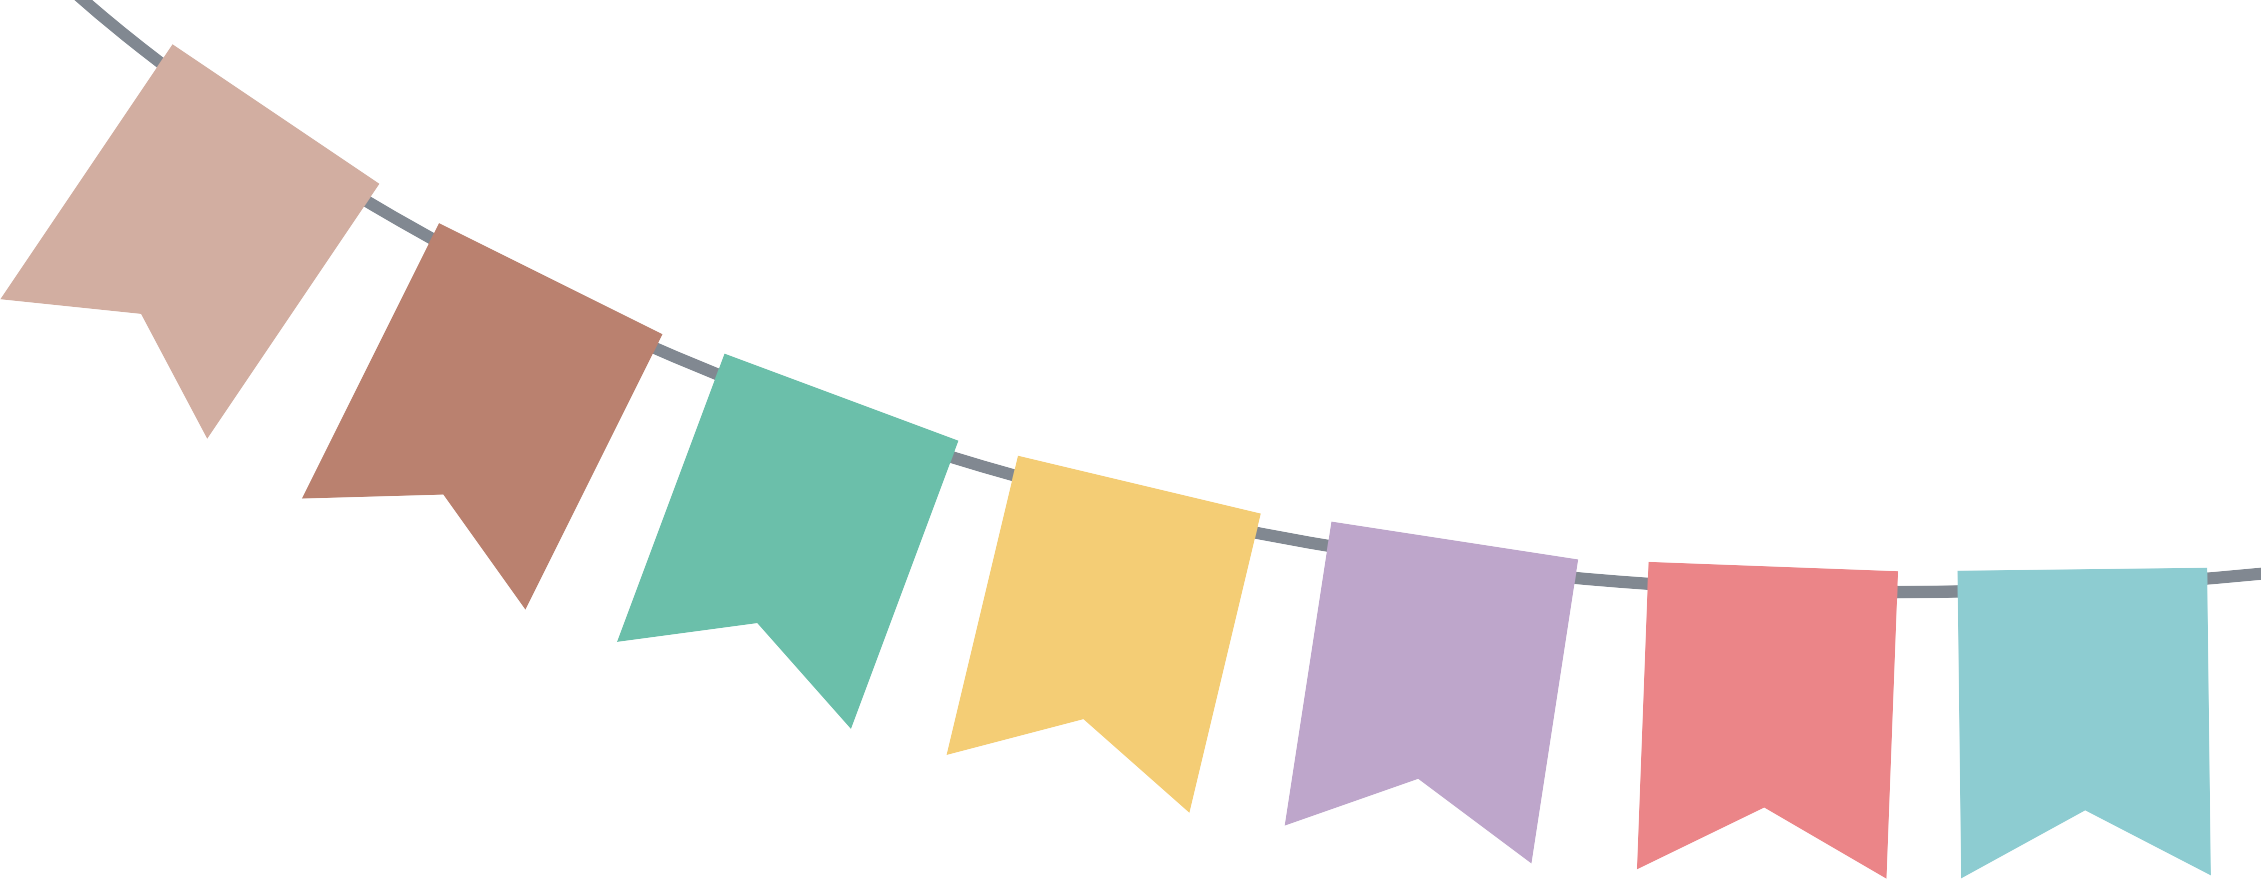 Party Flags PNG Image